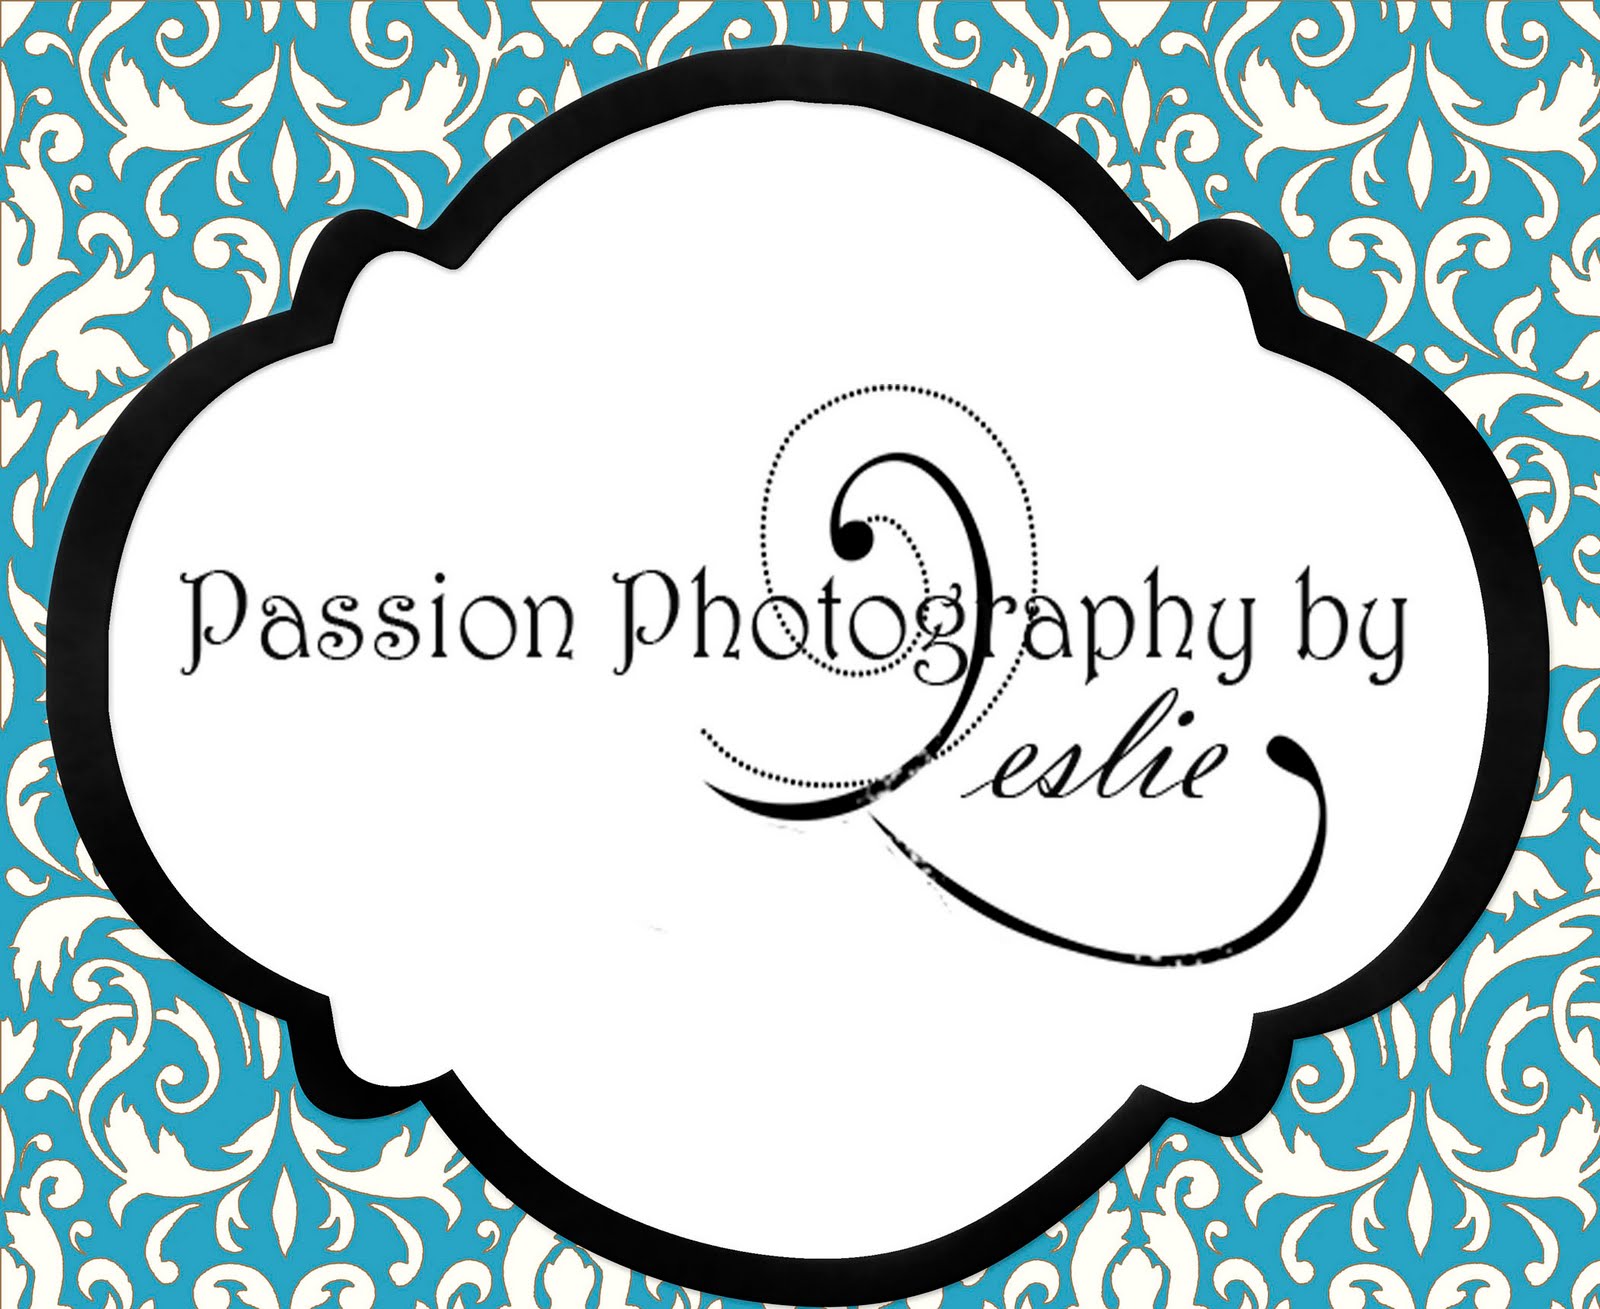 Passion Photography